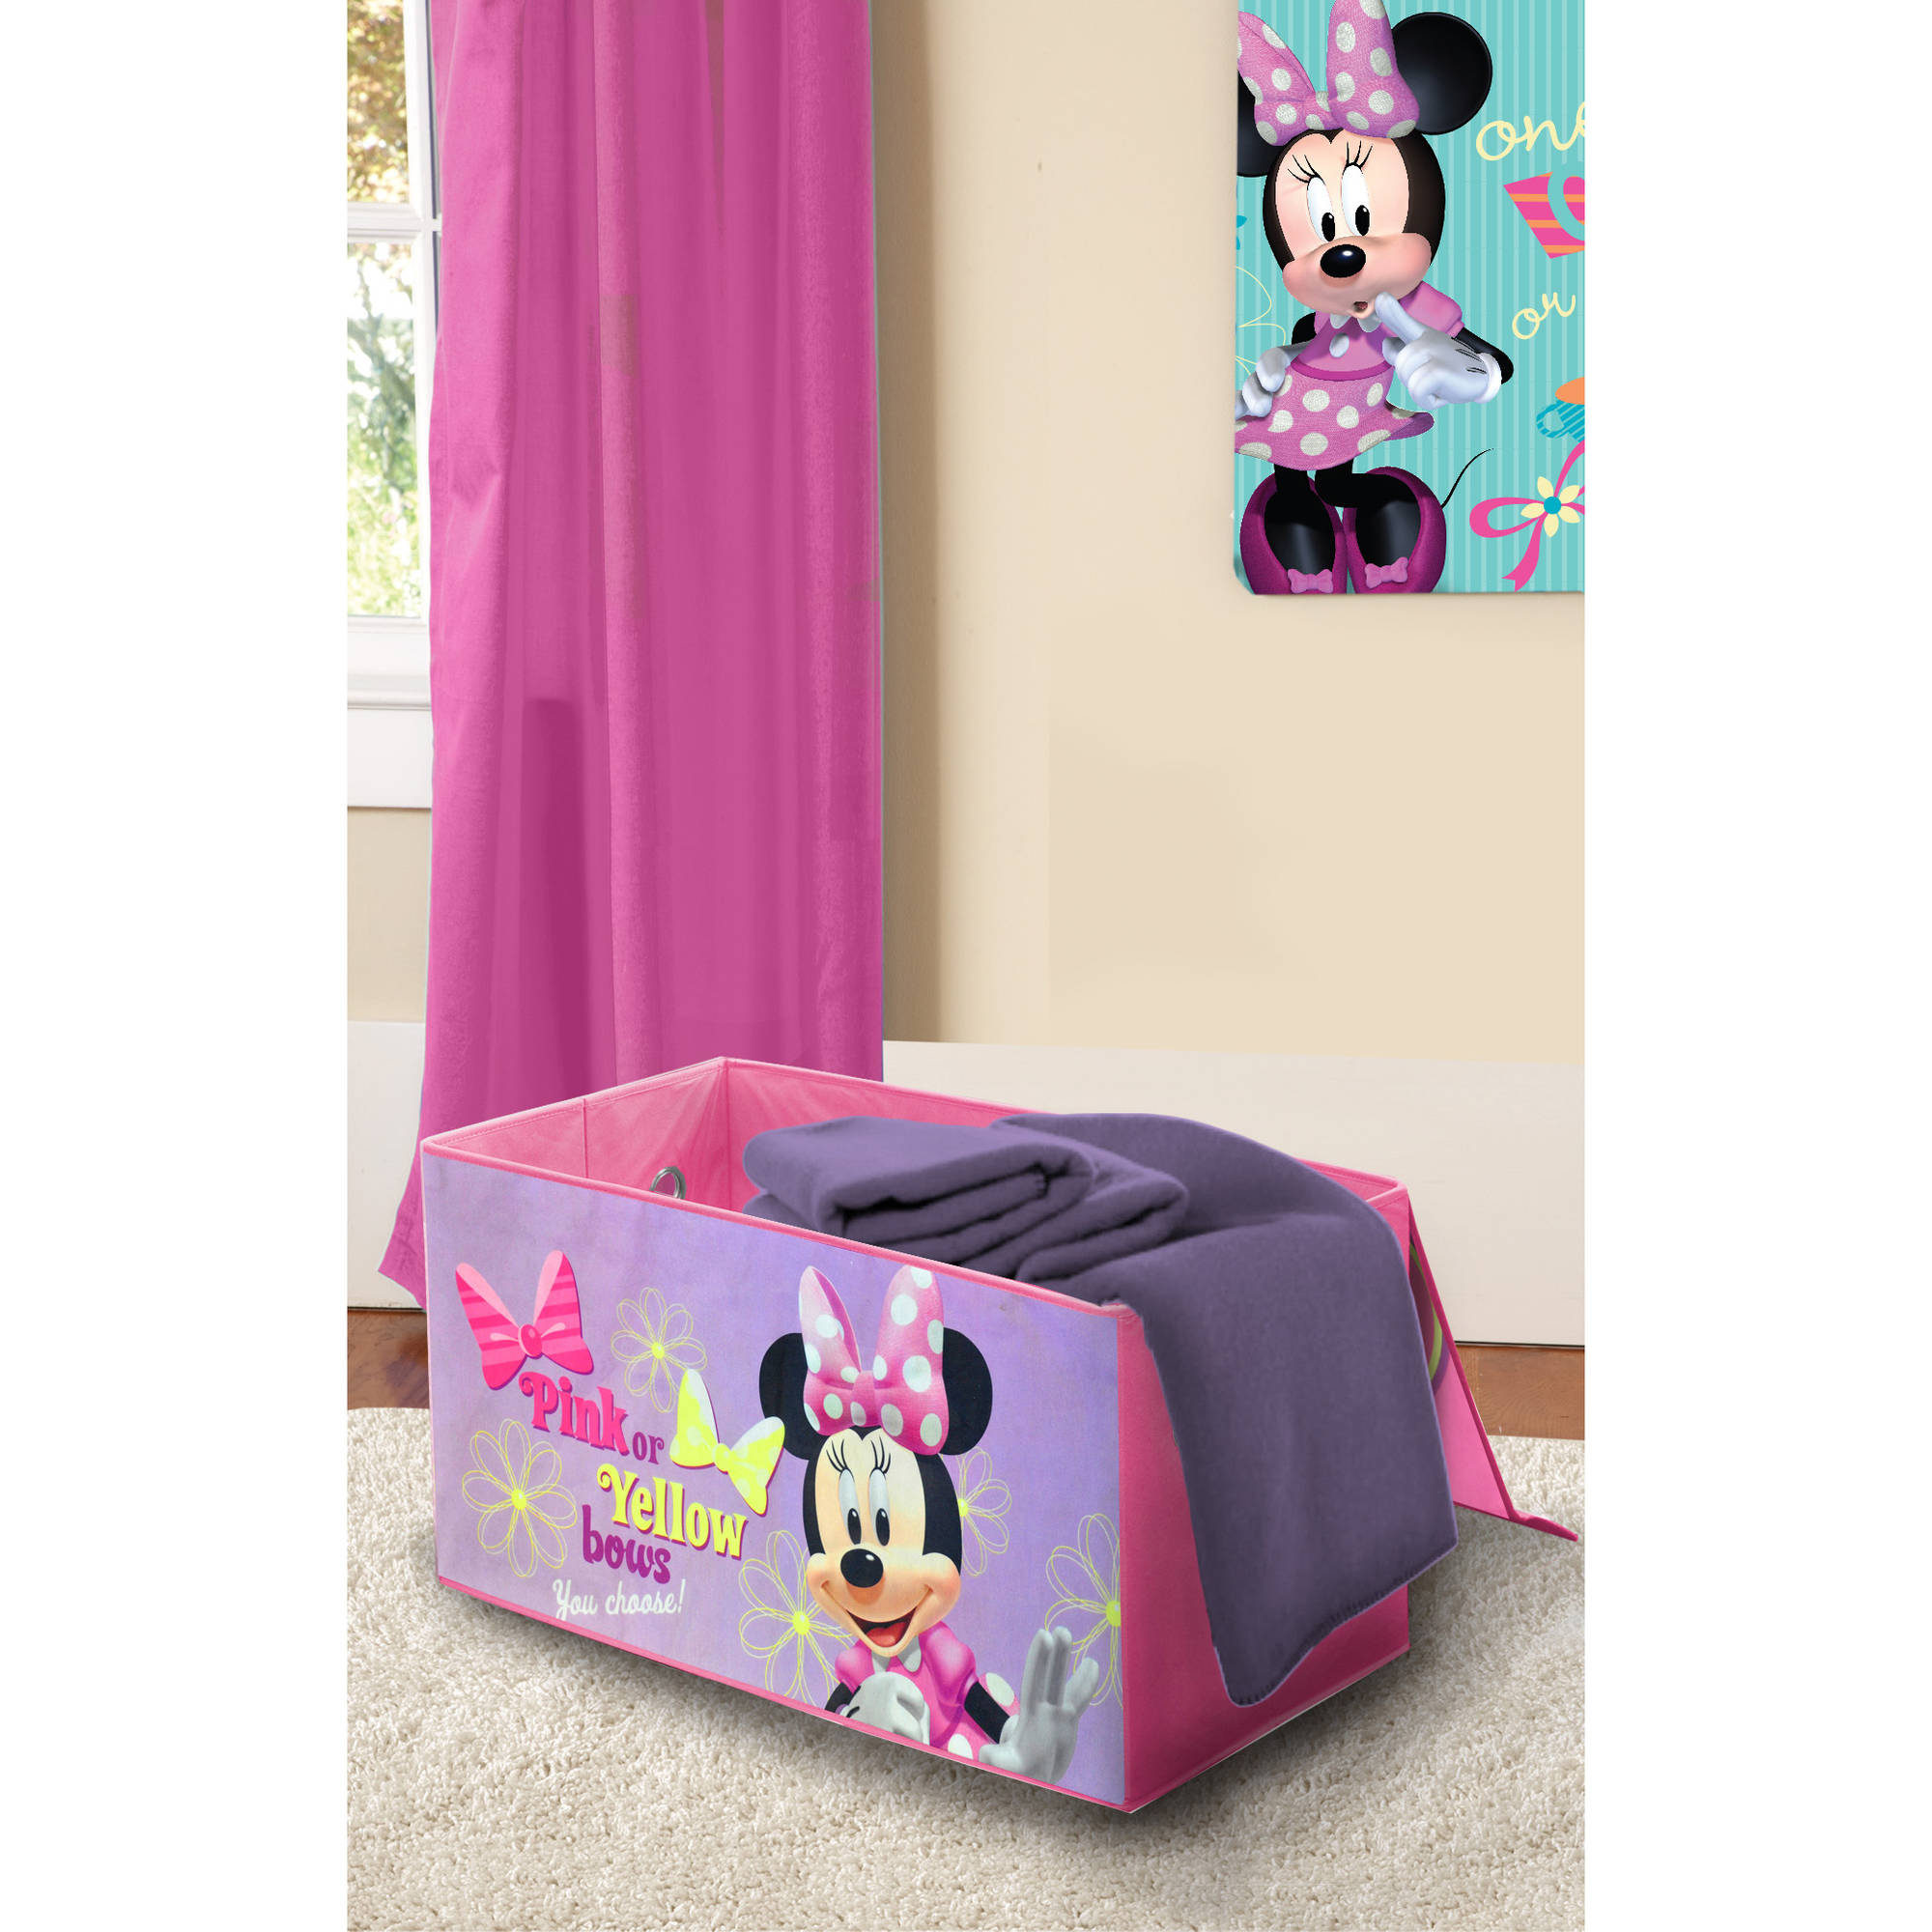 Disney Minnie Mouse Oversized Soft Collapsible Storage Toy Trunk - image 1 of 3